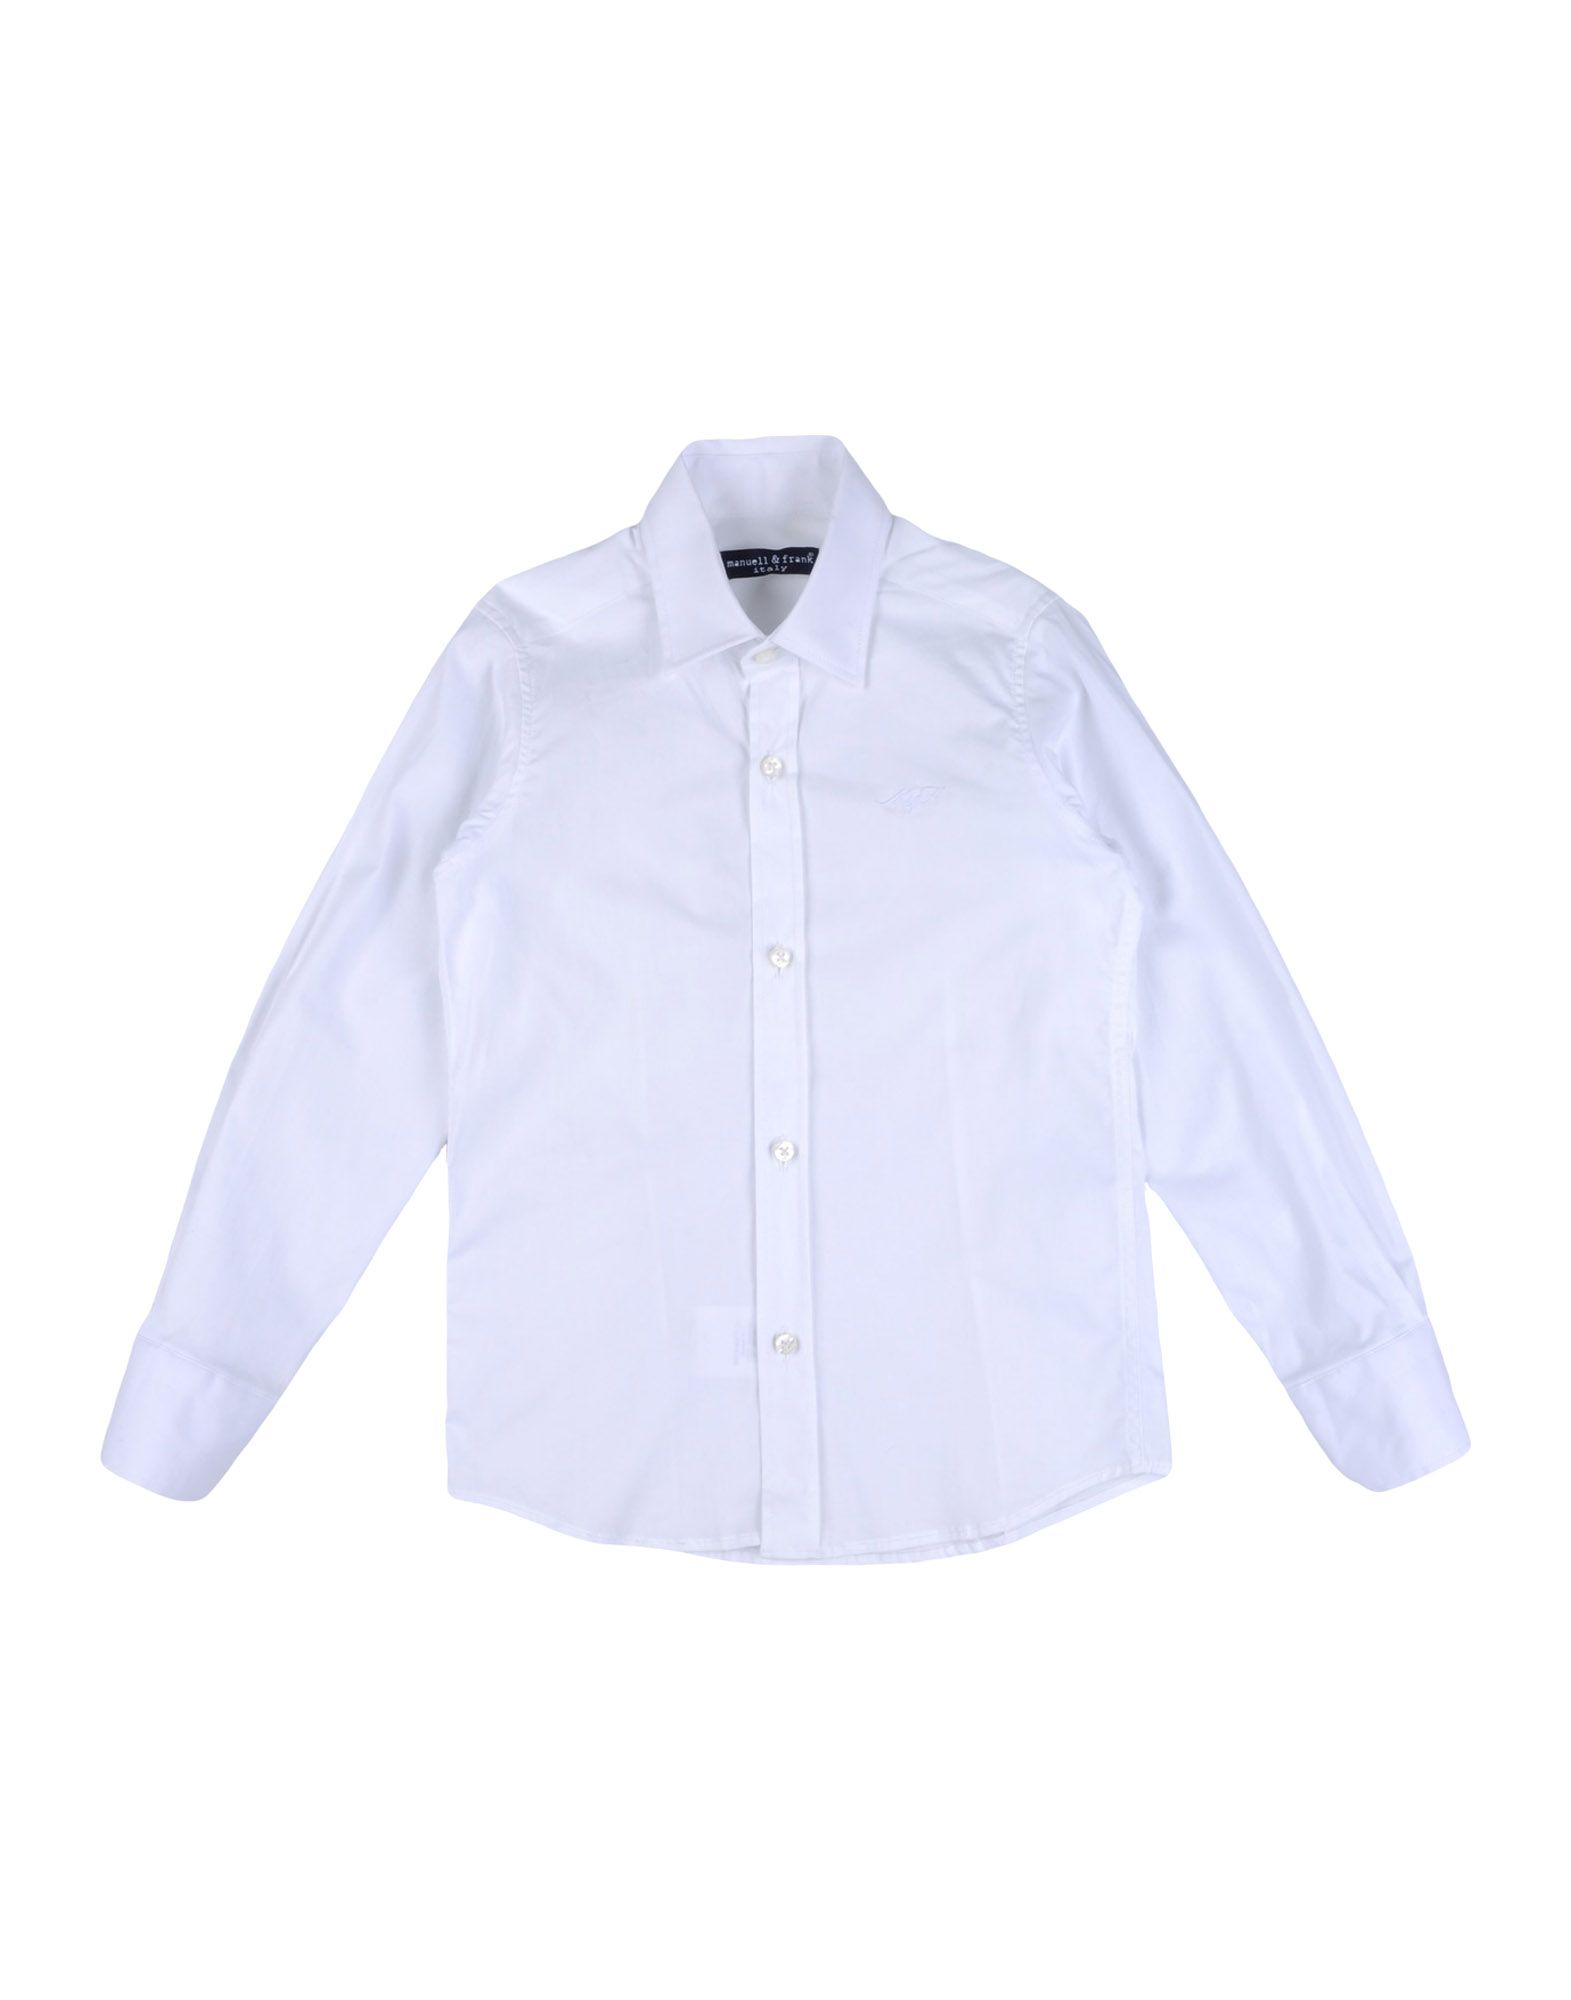 Manuell & Frank Kids' Shirts In White